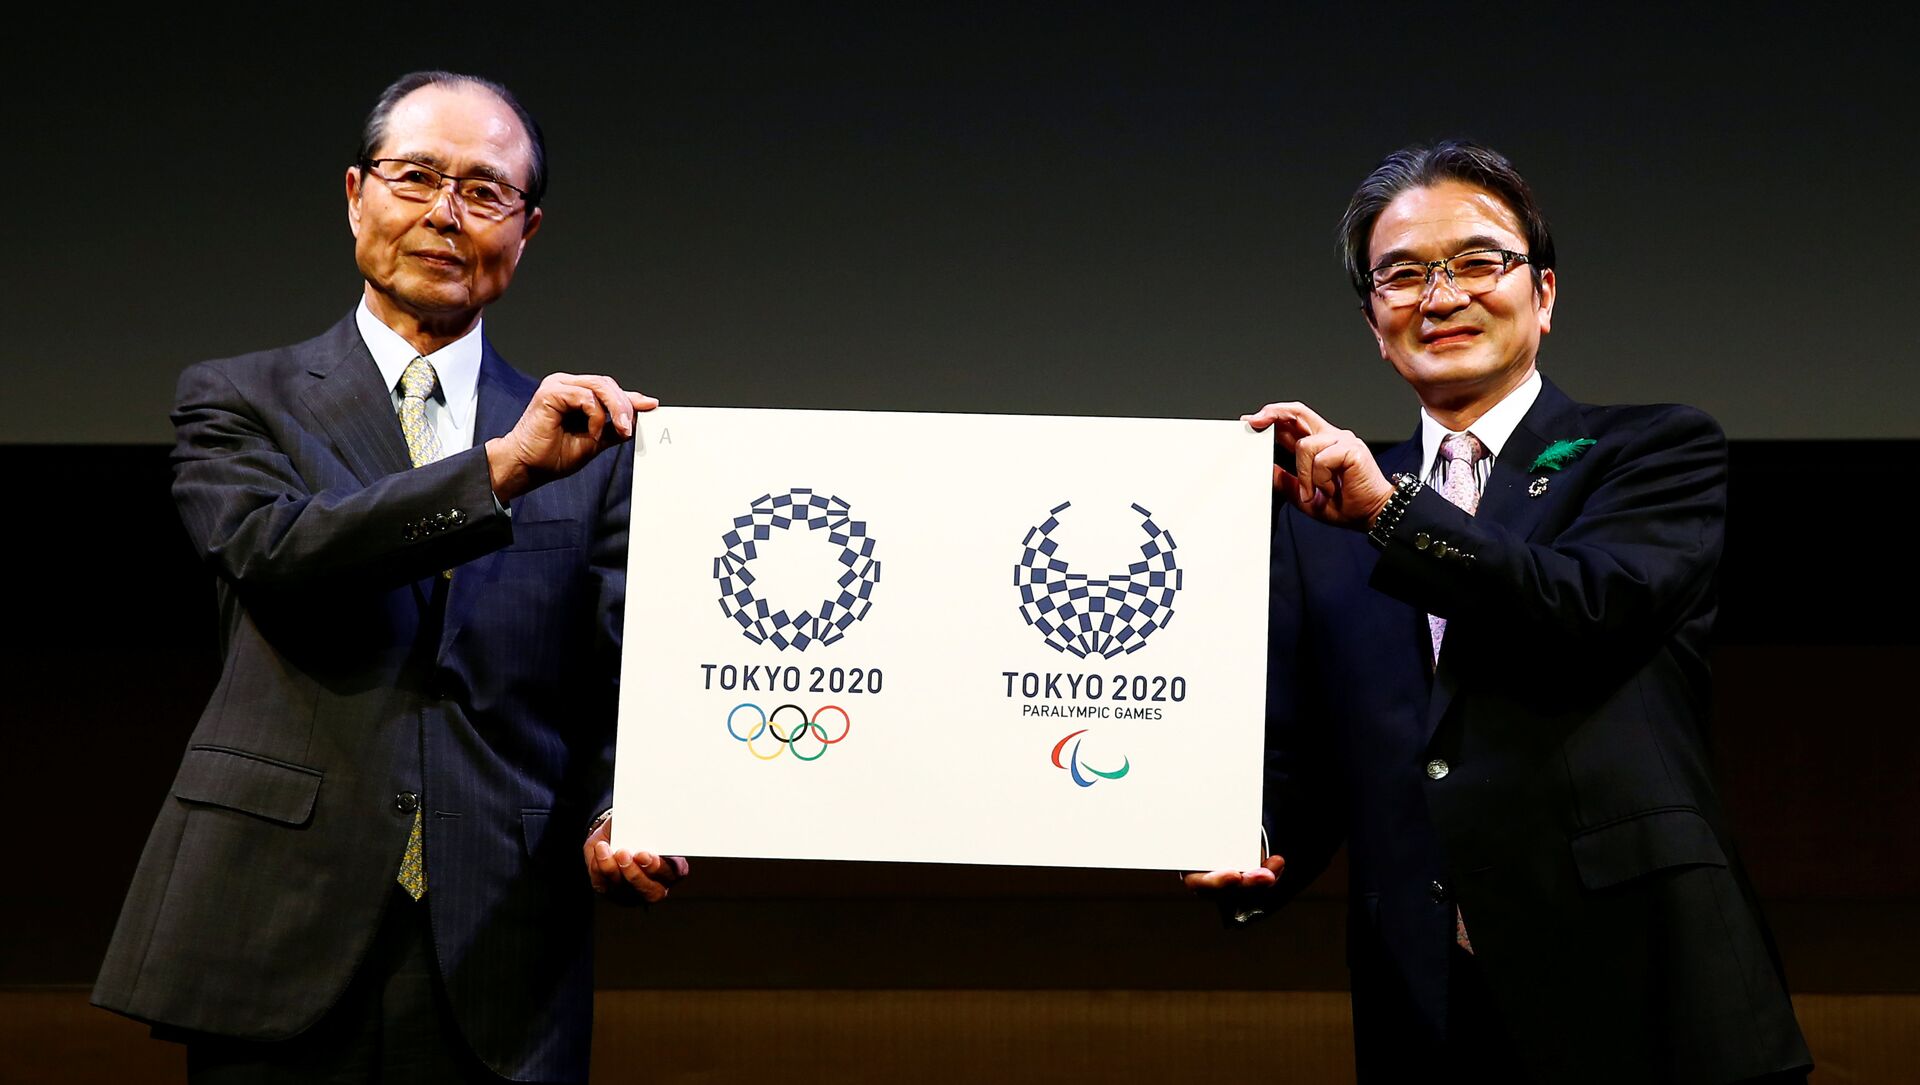 Tokyo 2020 Emblems Selection Committee Chairperson Miyata and committee member Oh present the winning design of the Tokyo 2020 Olympic Games and Paralympic Games in Tokyo - Sputnik Afrique, 1920, 29.06.2021